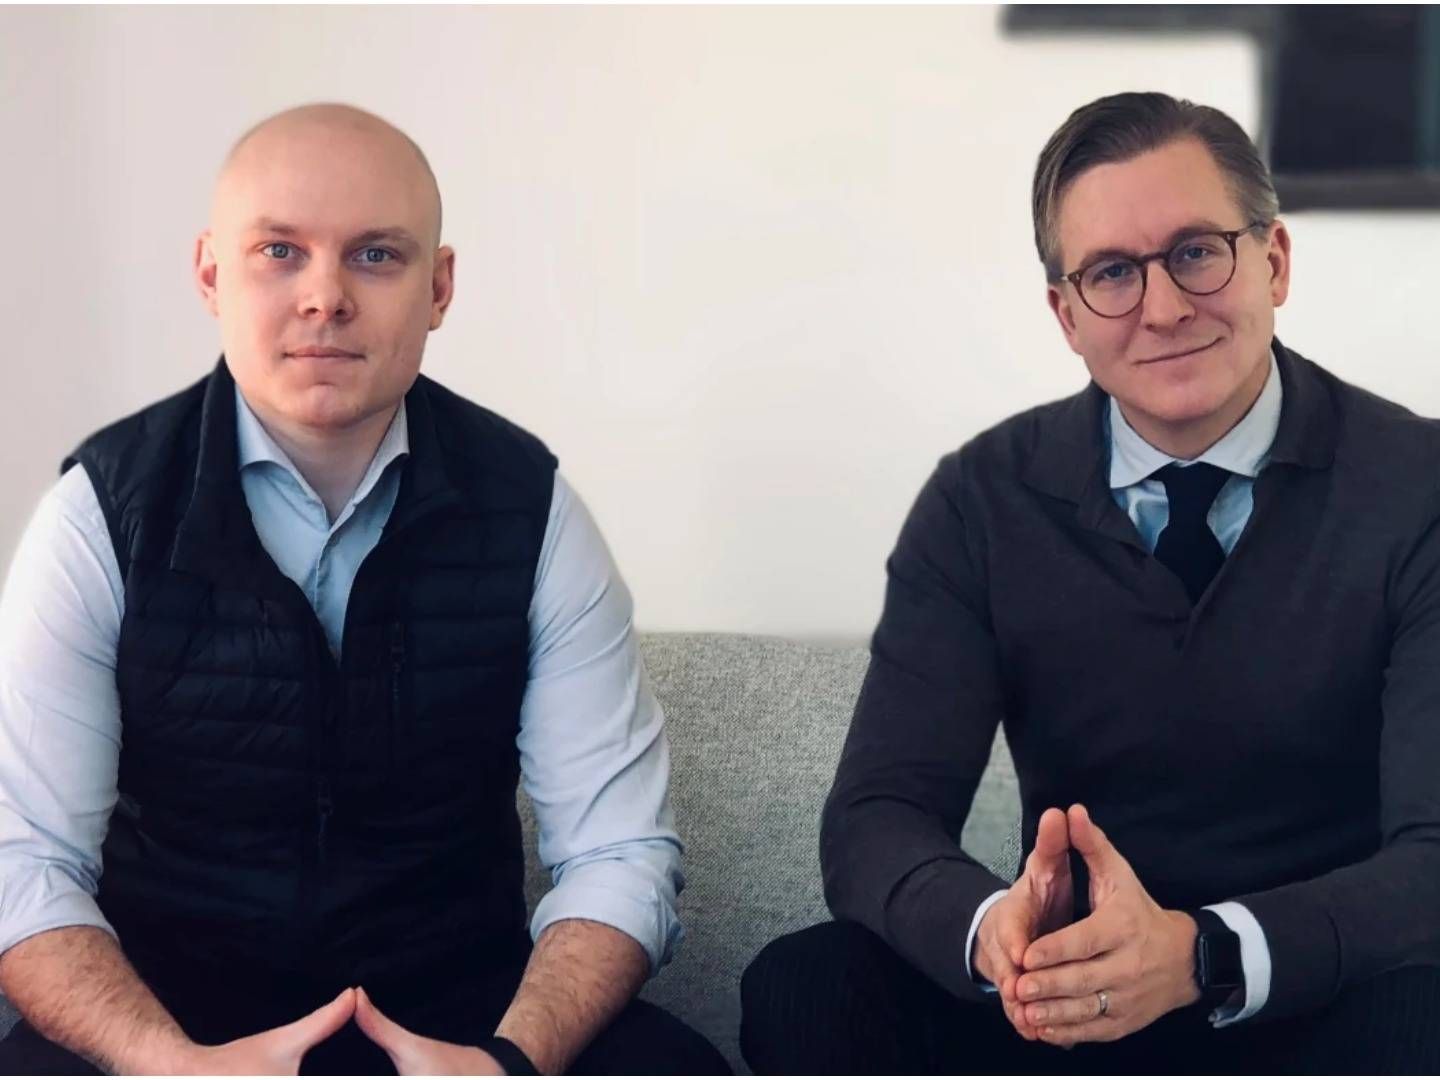 Managing Partners of Credian Investment Management Johannes Johnsson (l.) and Per Djerf (r.). | Photo: Credian Investment Management PR.